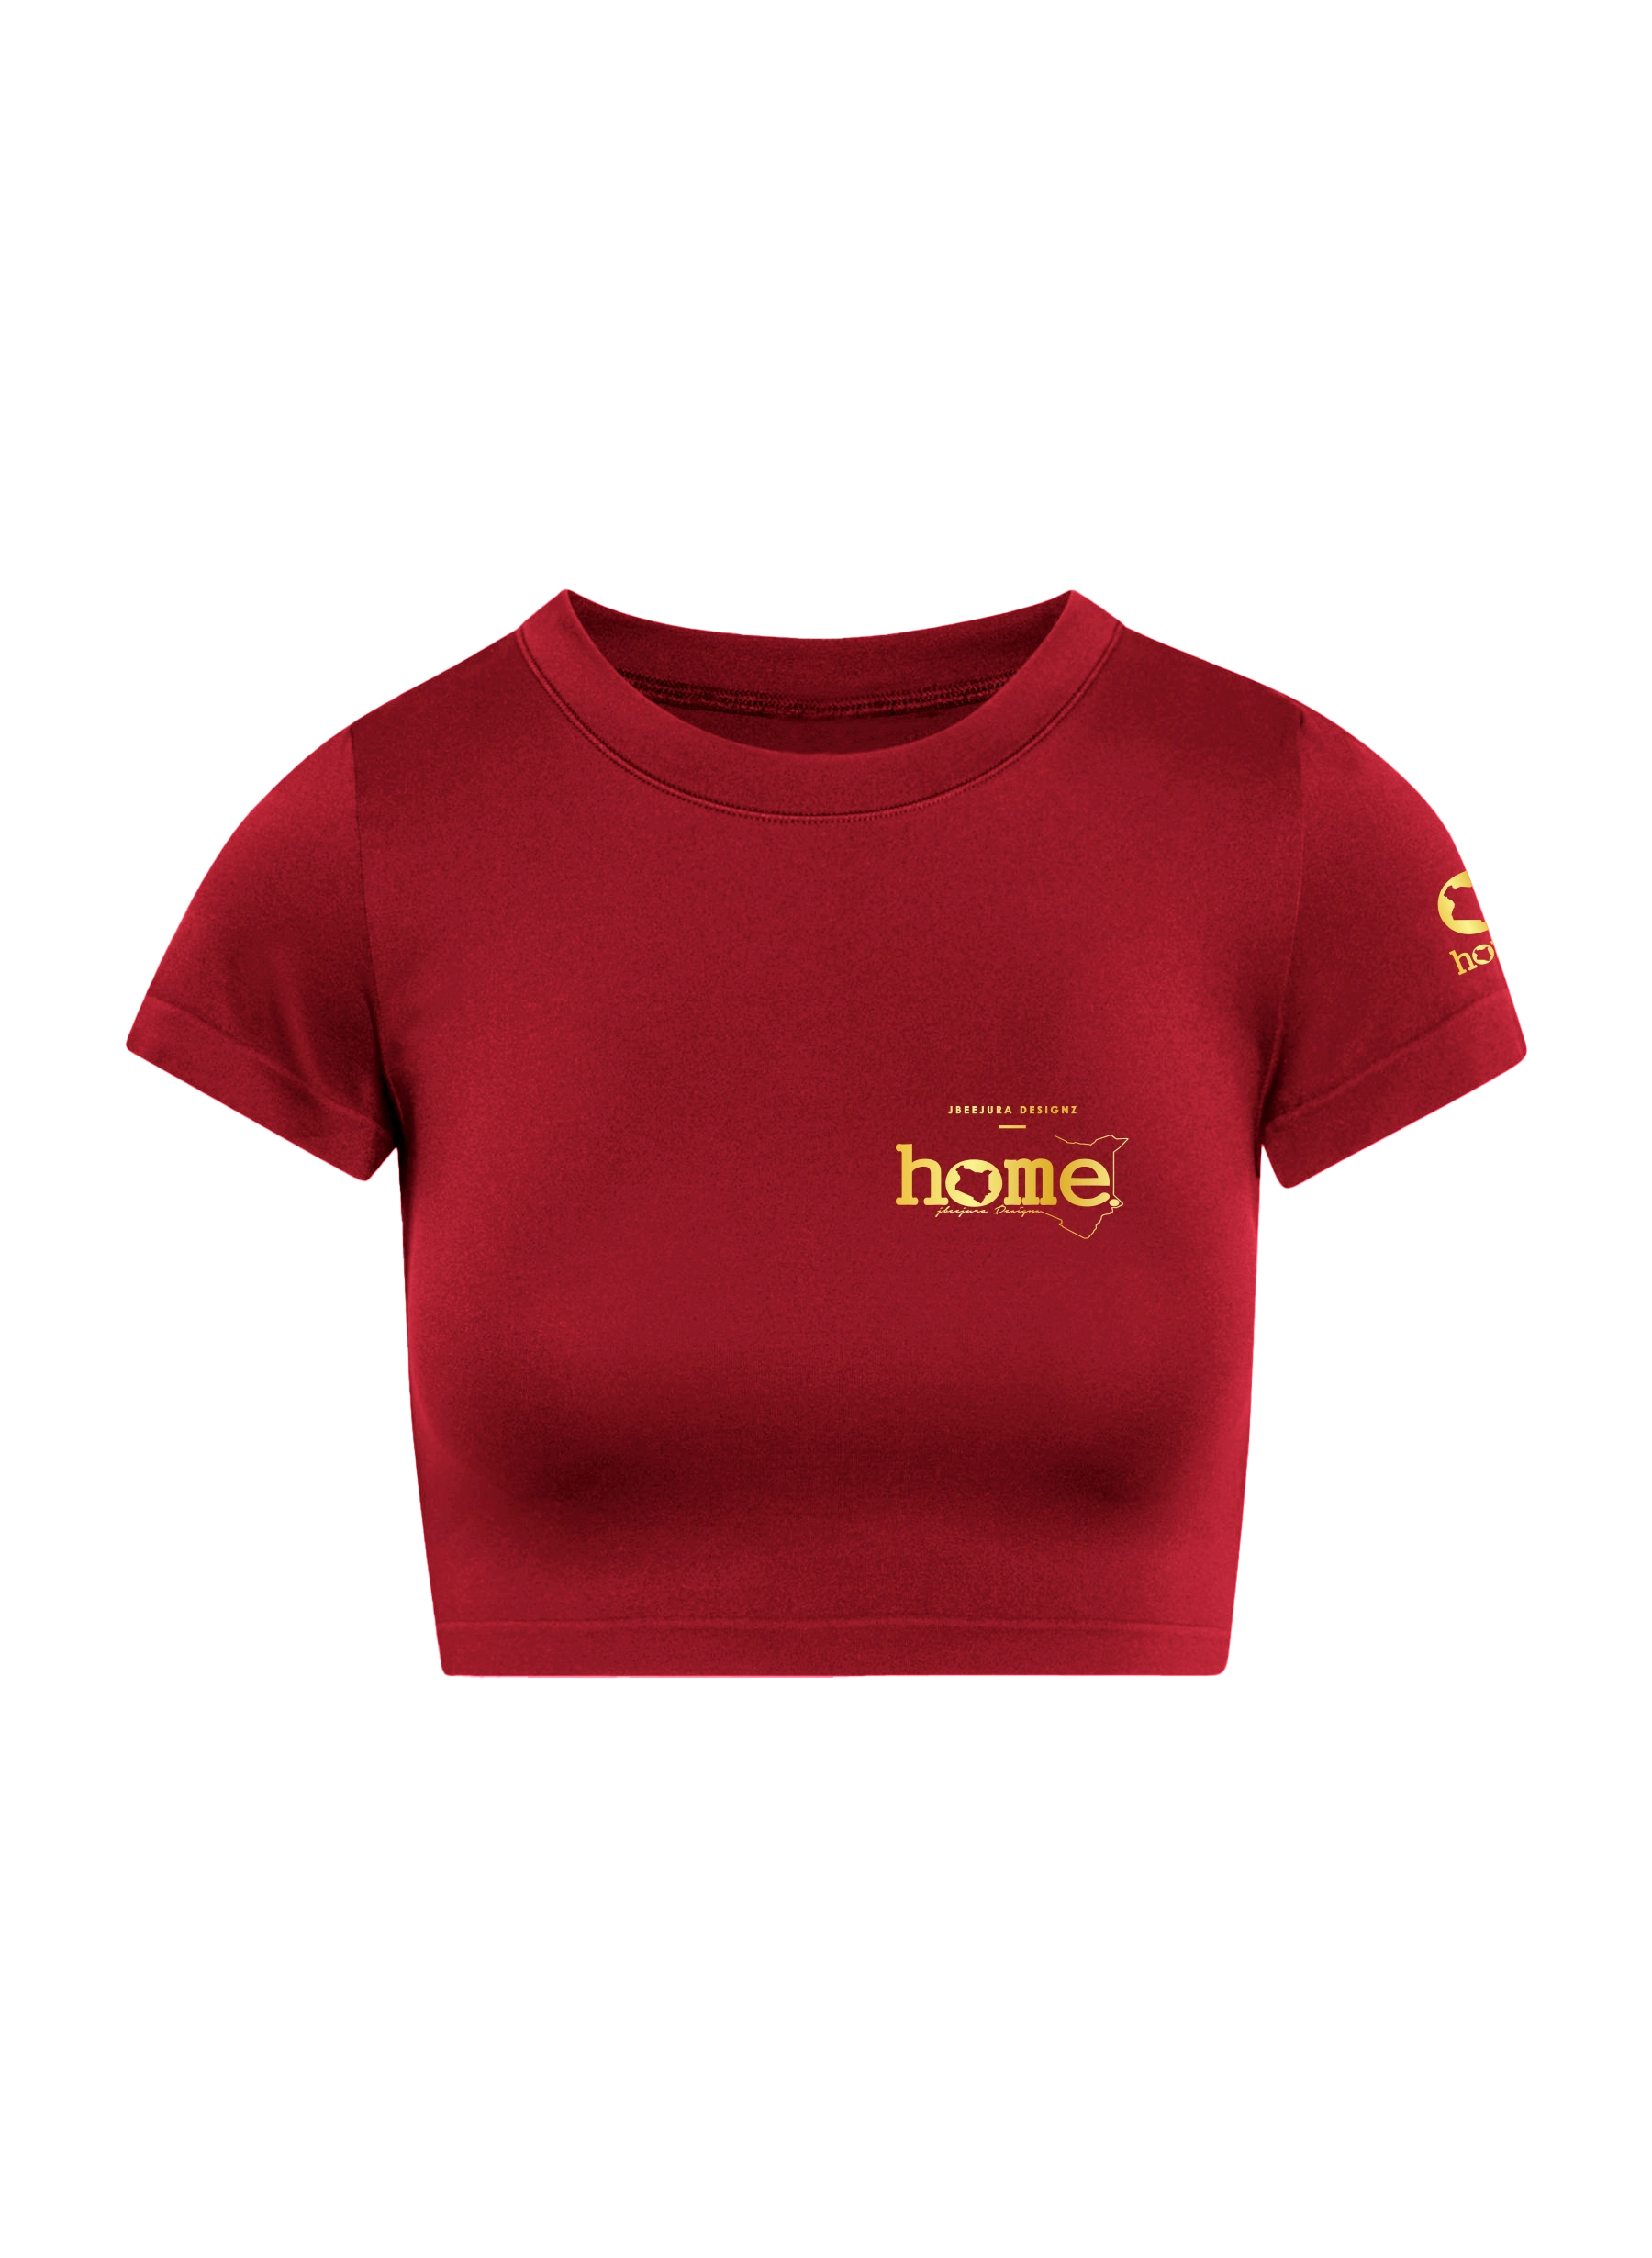 home_254 SHORT SLEEVED MAROON RED CROPPED ARIA TEE WITH A GOLD 3D WORDS PRINT – COTTON PLUS FABRIC